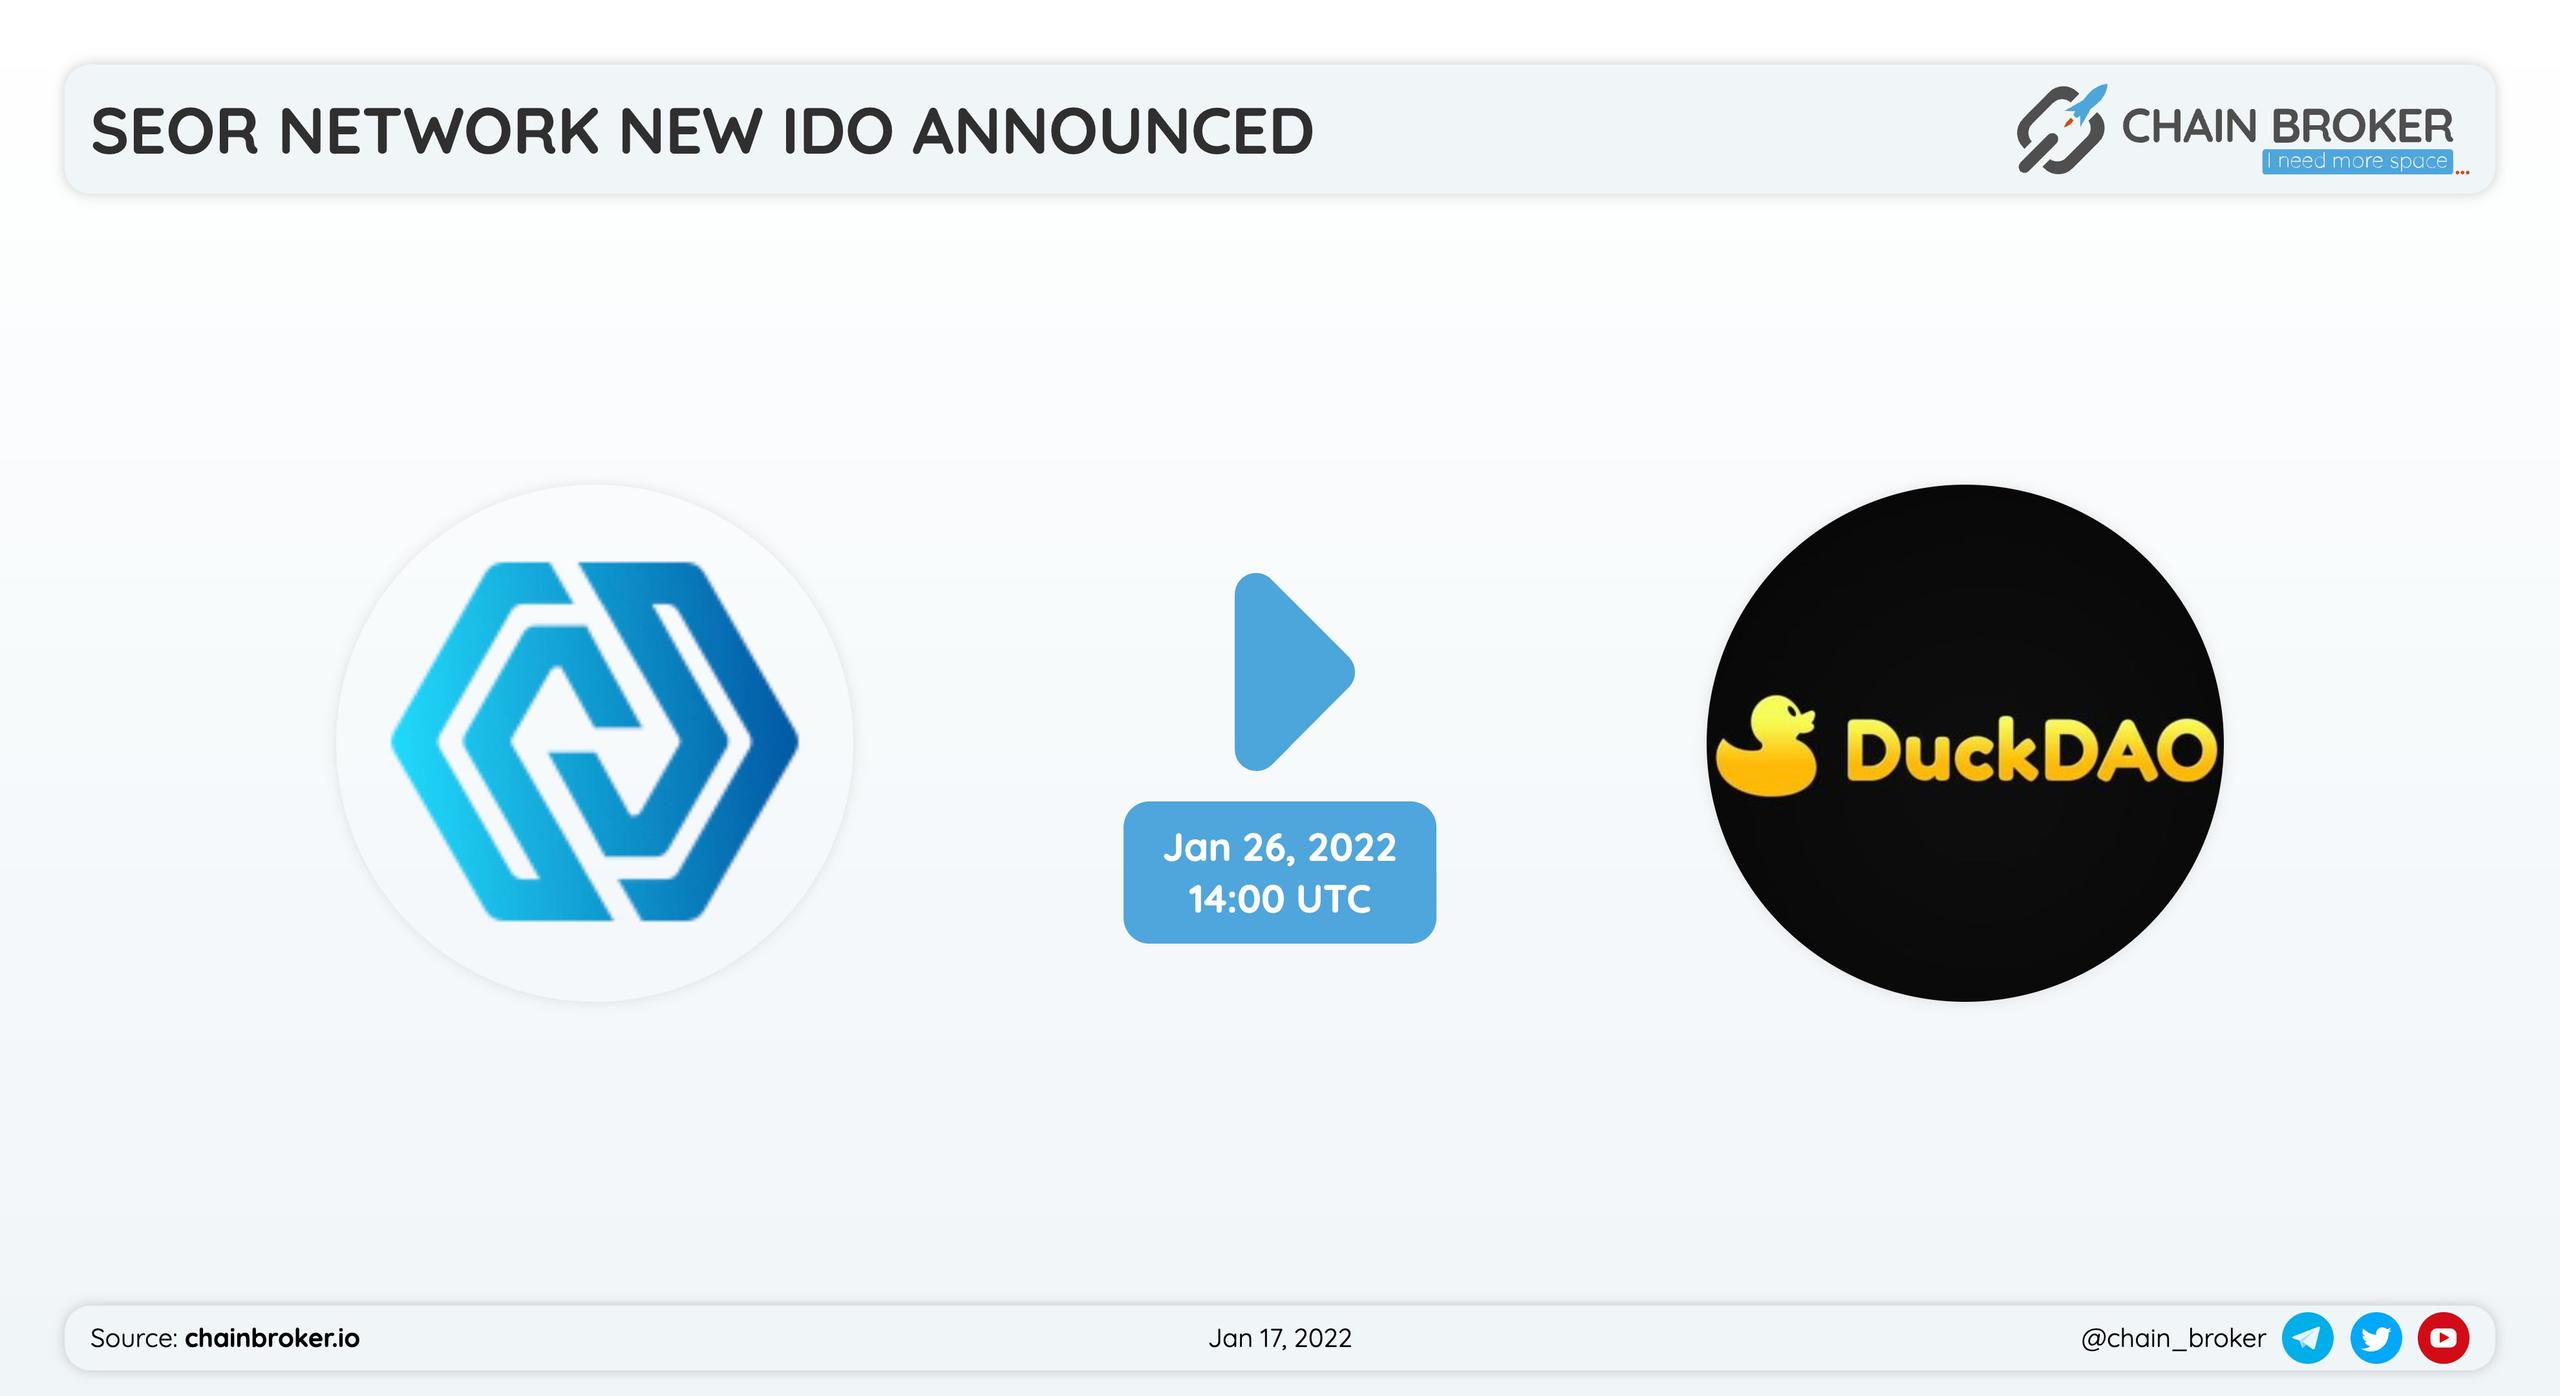 Seor Network has partnered with DaoDuck for a token launch.